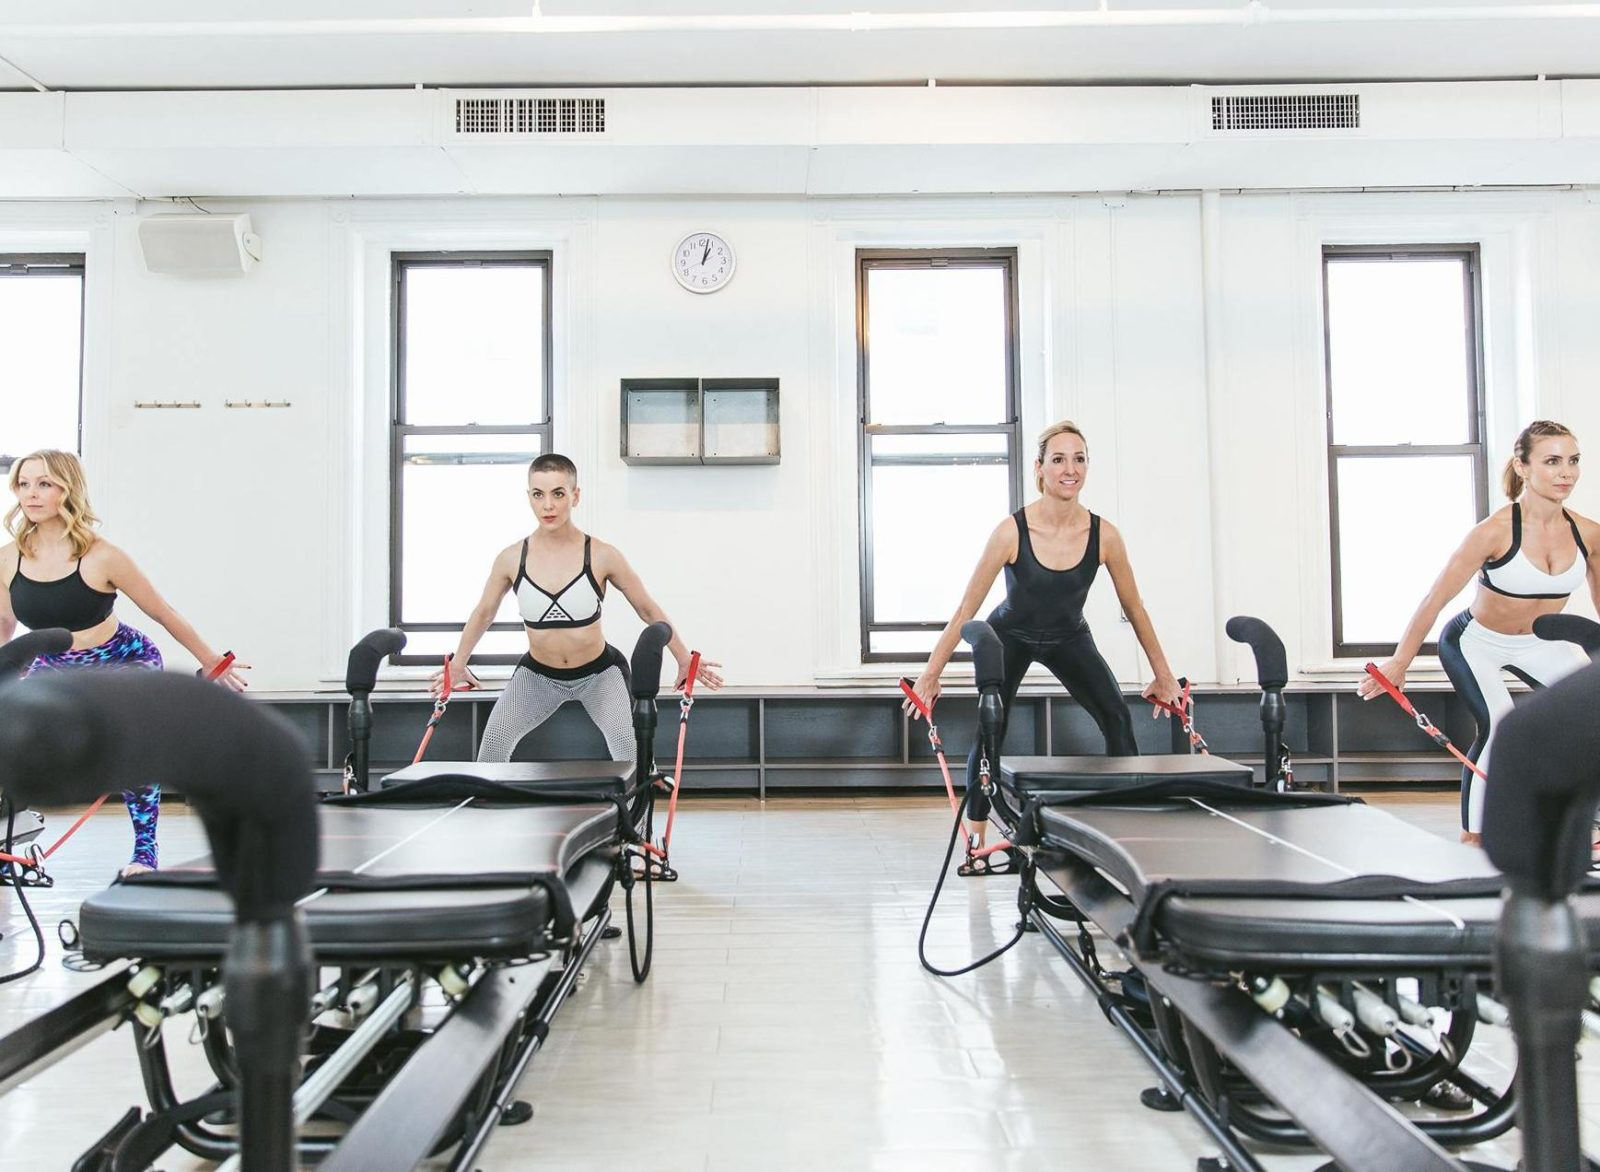 Boutique Fitness Gym: Why People Love the Concept